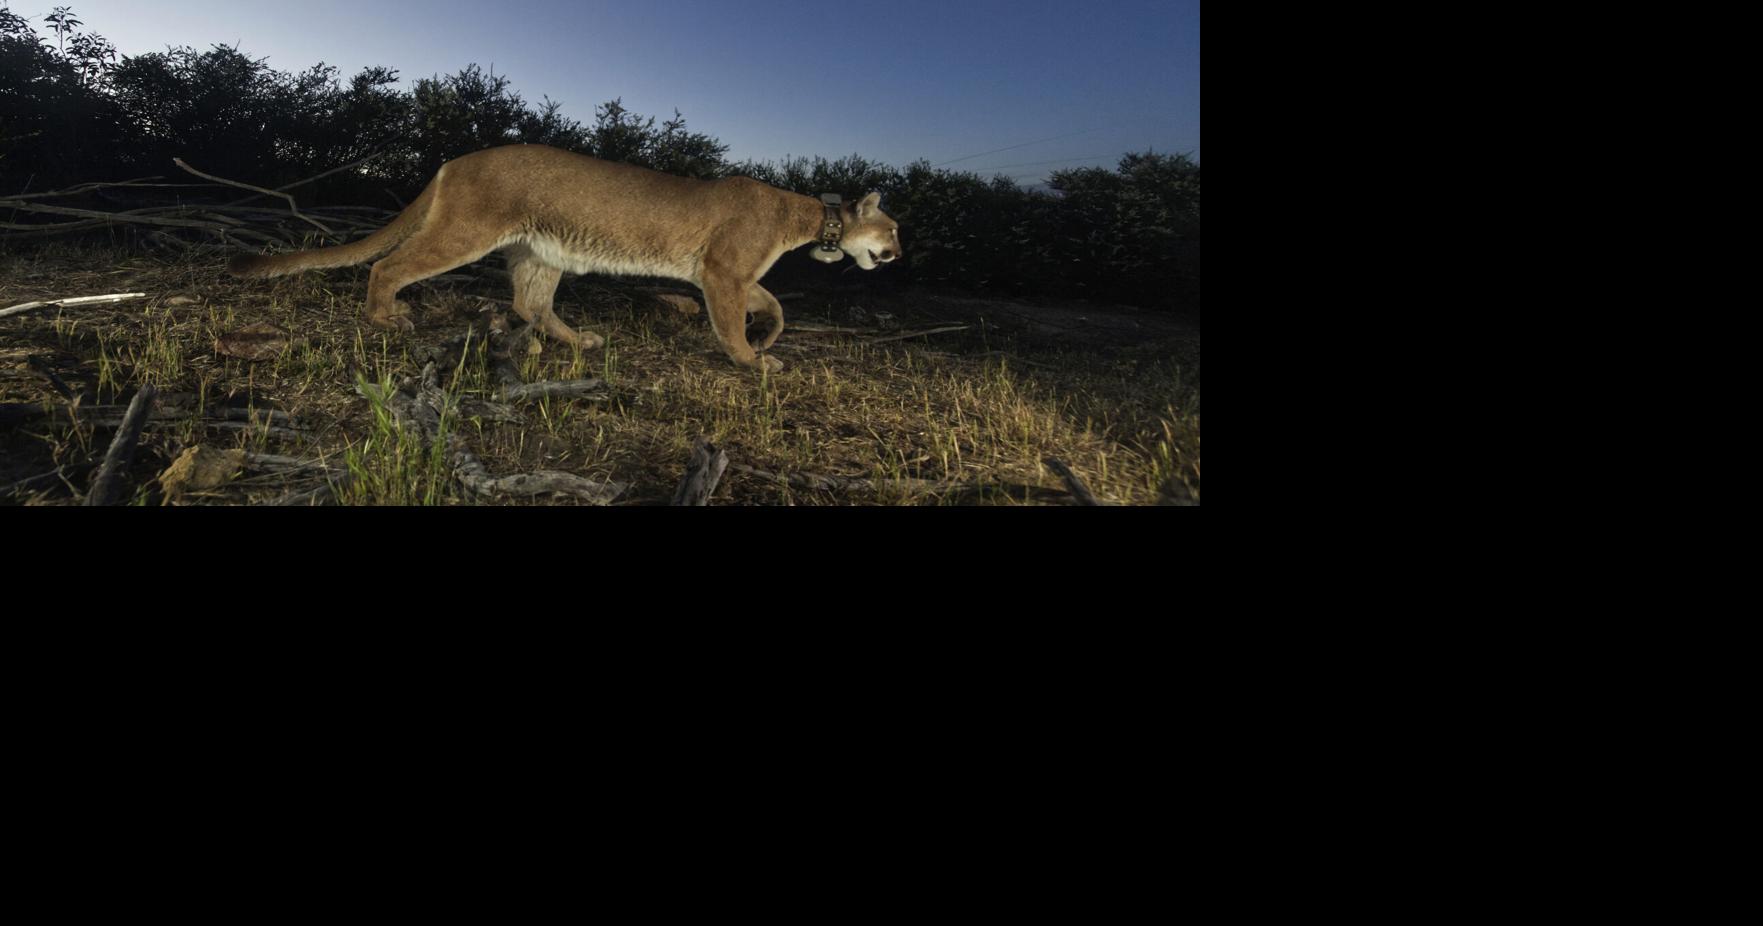 Mountain lion hunting in west central Montana has increased